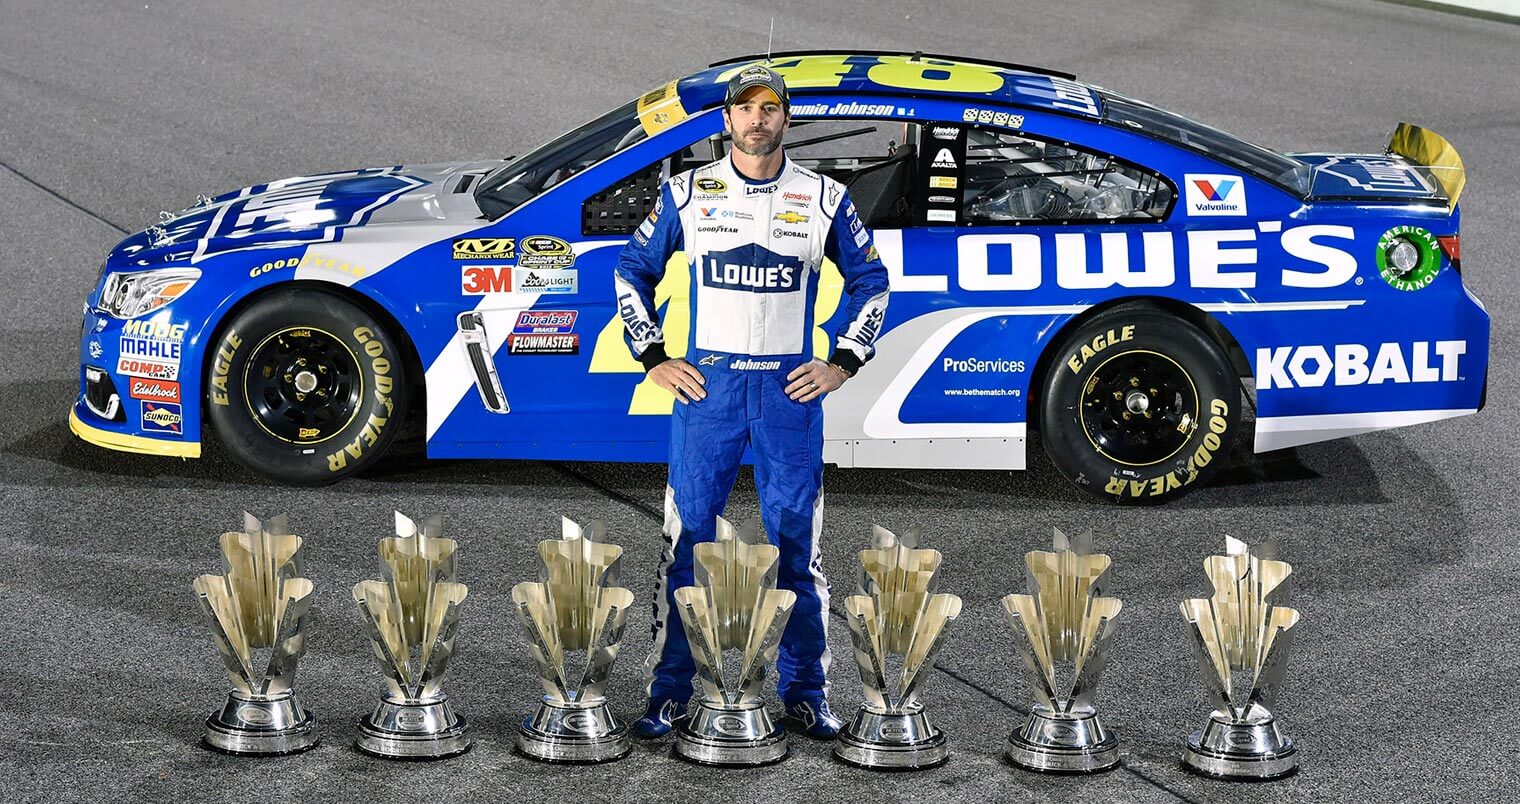 Chillin' with Jimmie Johnson, featured image